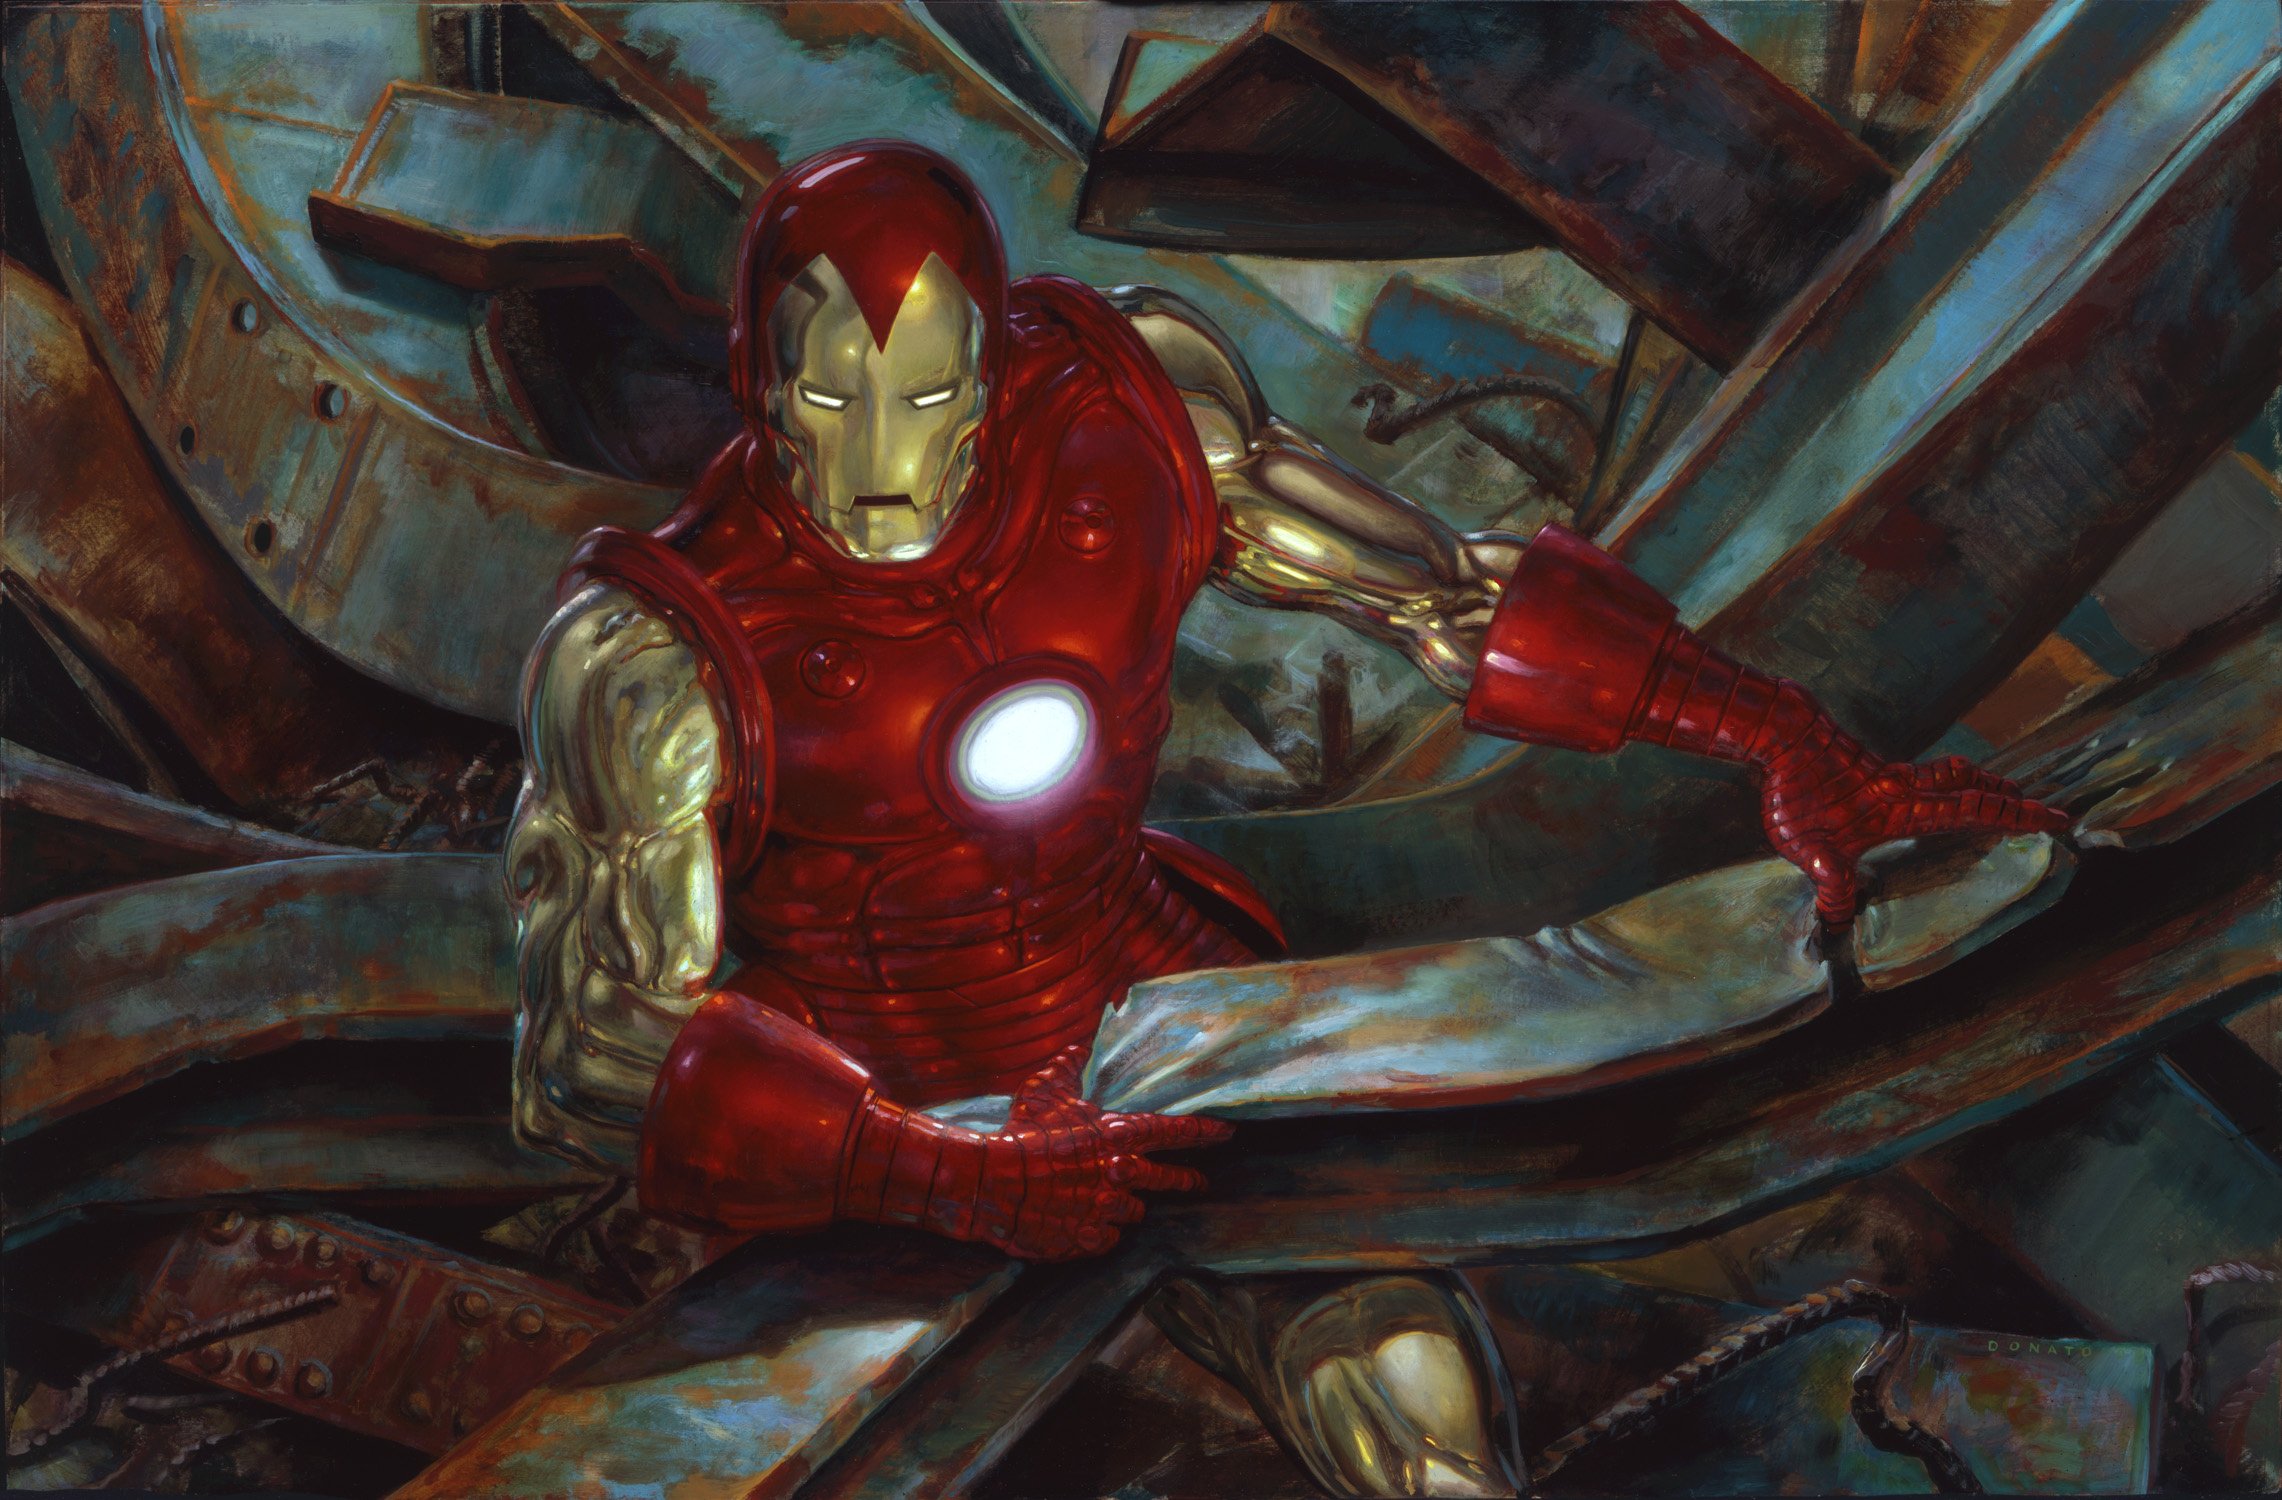 Iron Man
24" x 36"  Oil on Panel  2009
Created as a demonstration in techniques for the Illustration Master Class
original art available for purchase